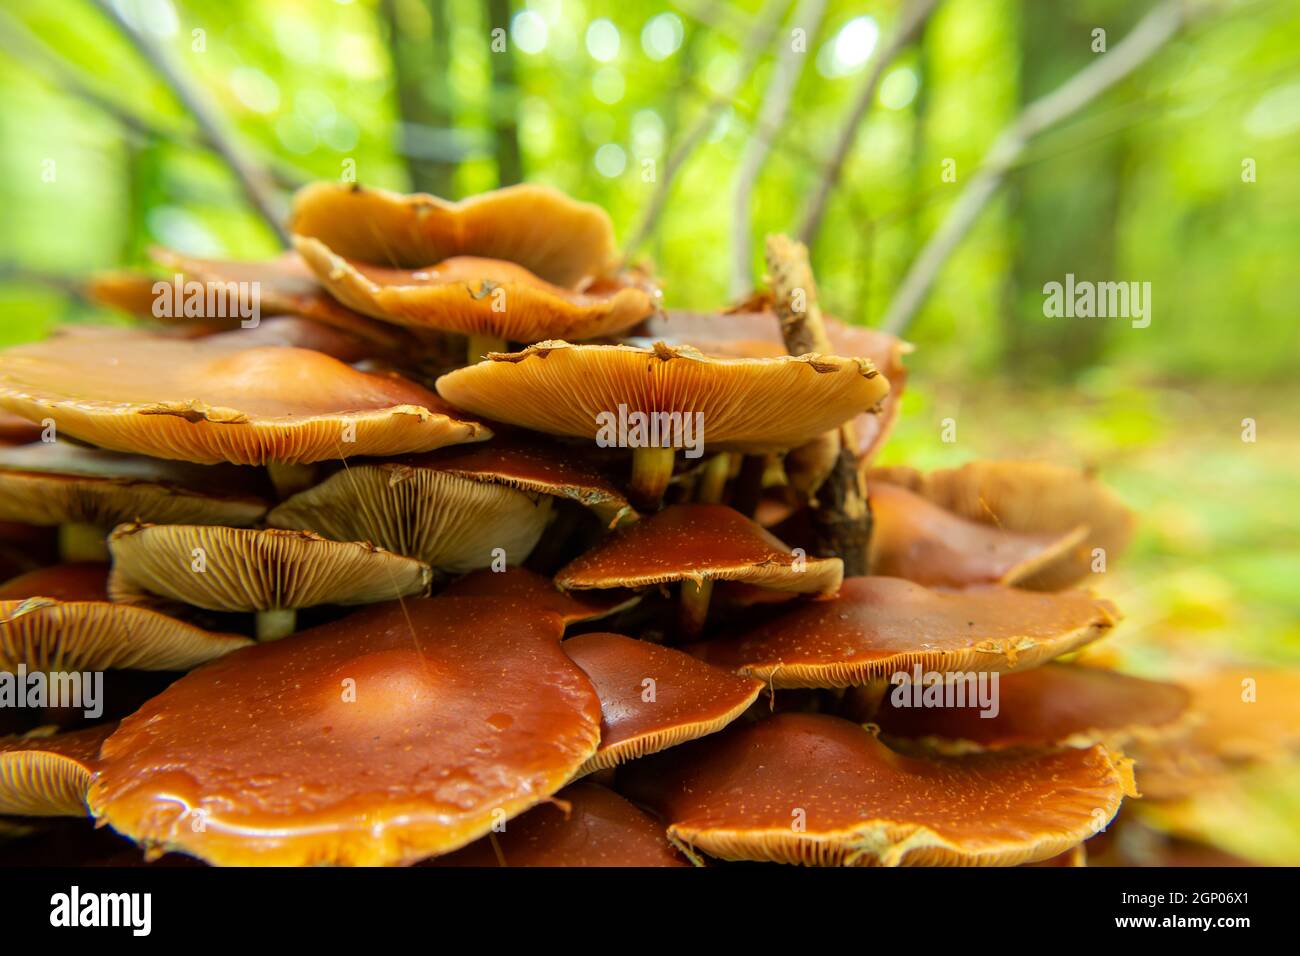 A group of brown mushrooms with gills, autumn view Stock Photo